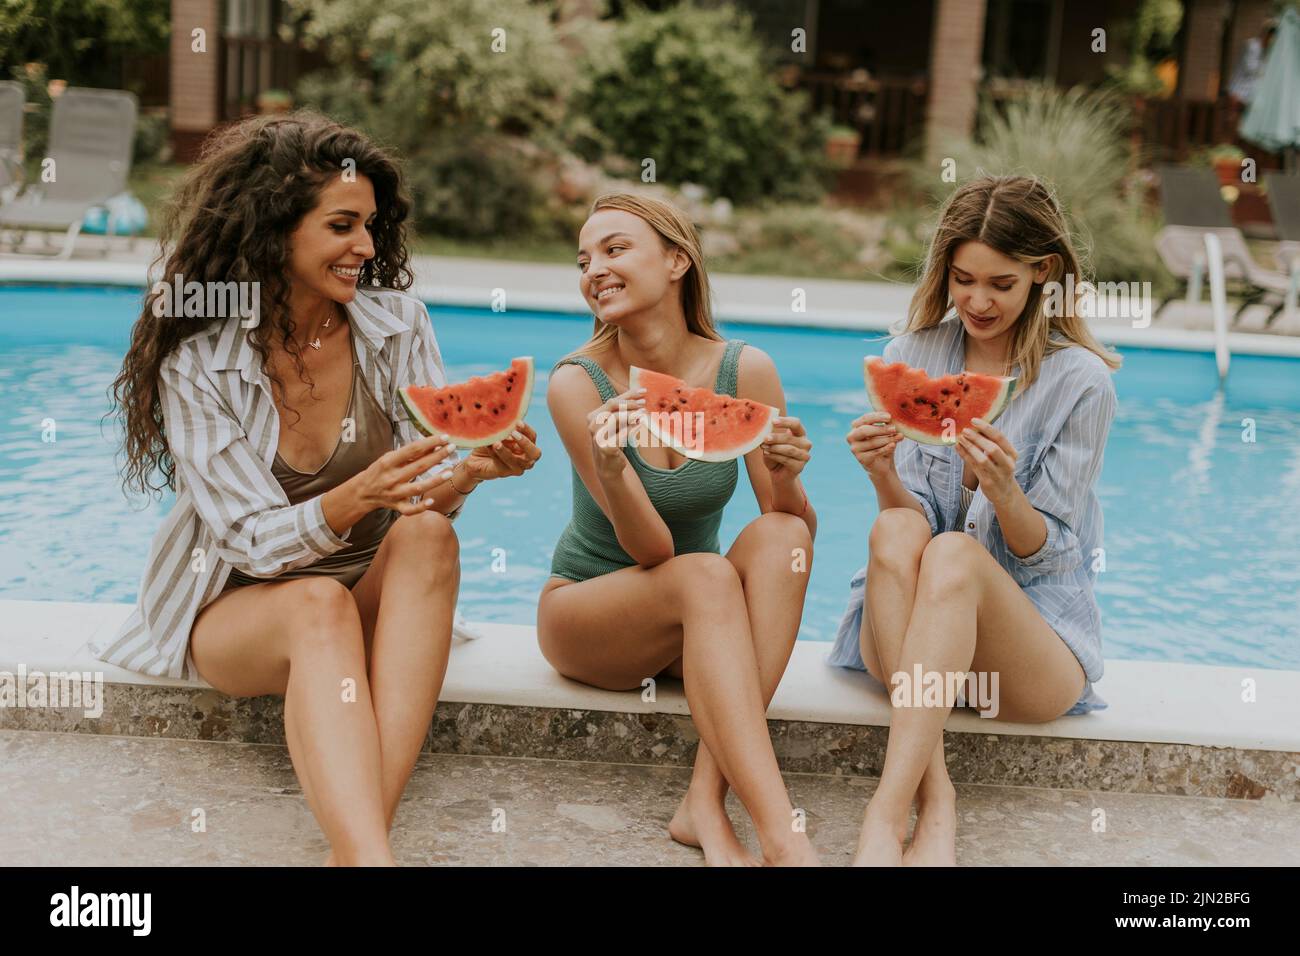 Three cute young women sitting on by the swimming pool and eating watermelon in the house backyard Stock Photo